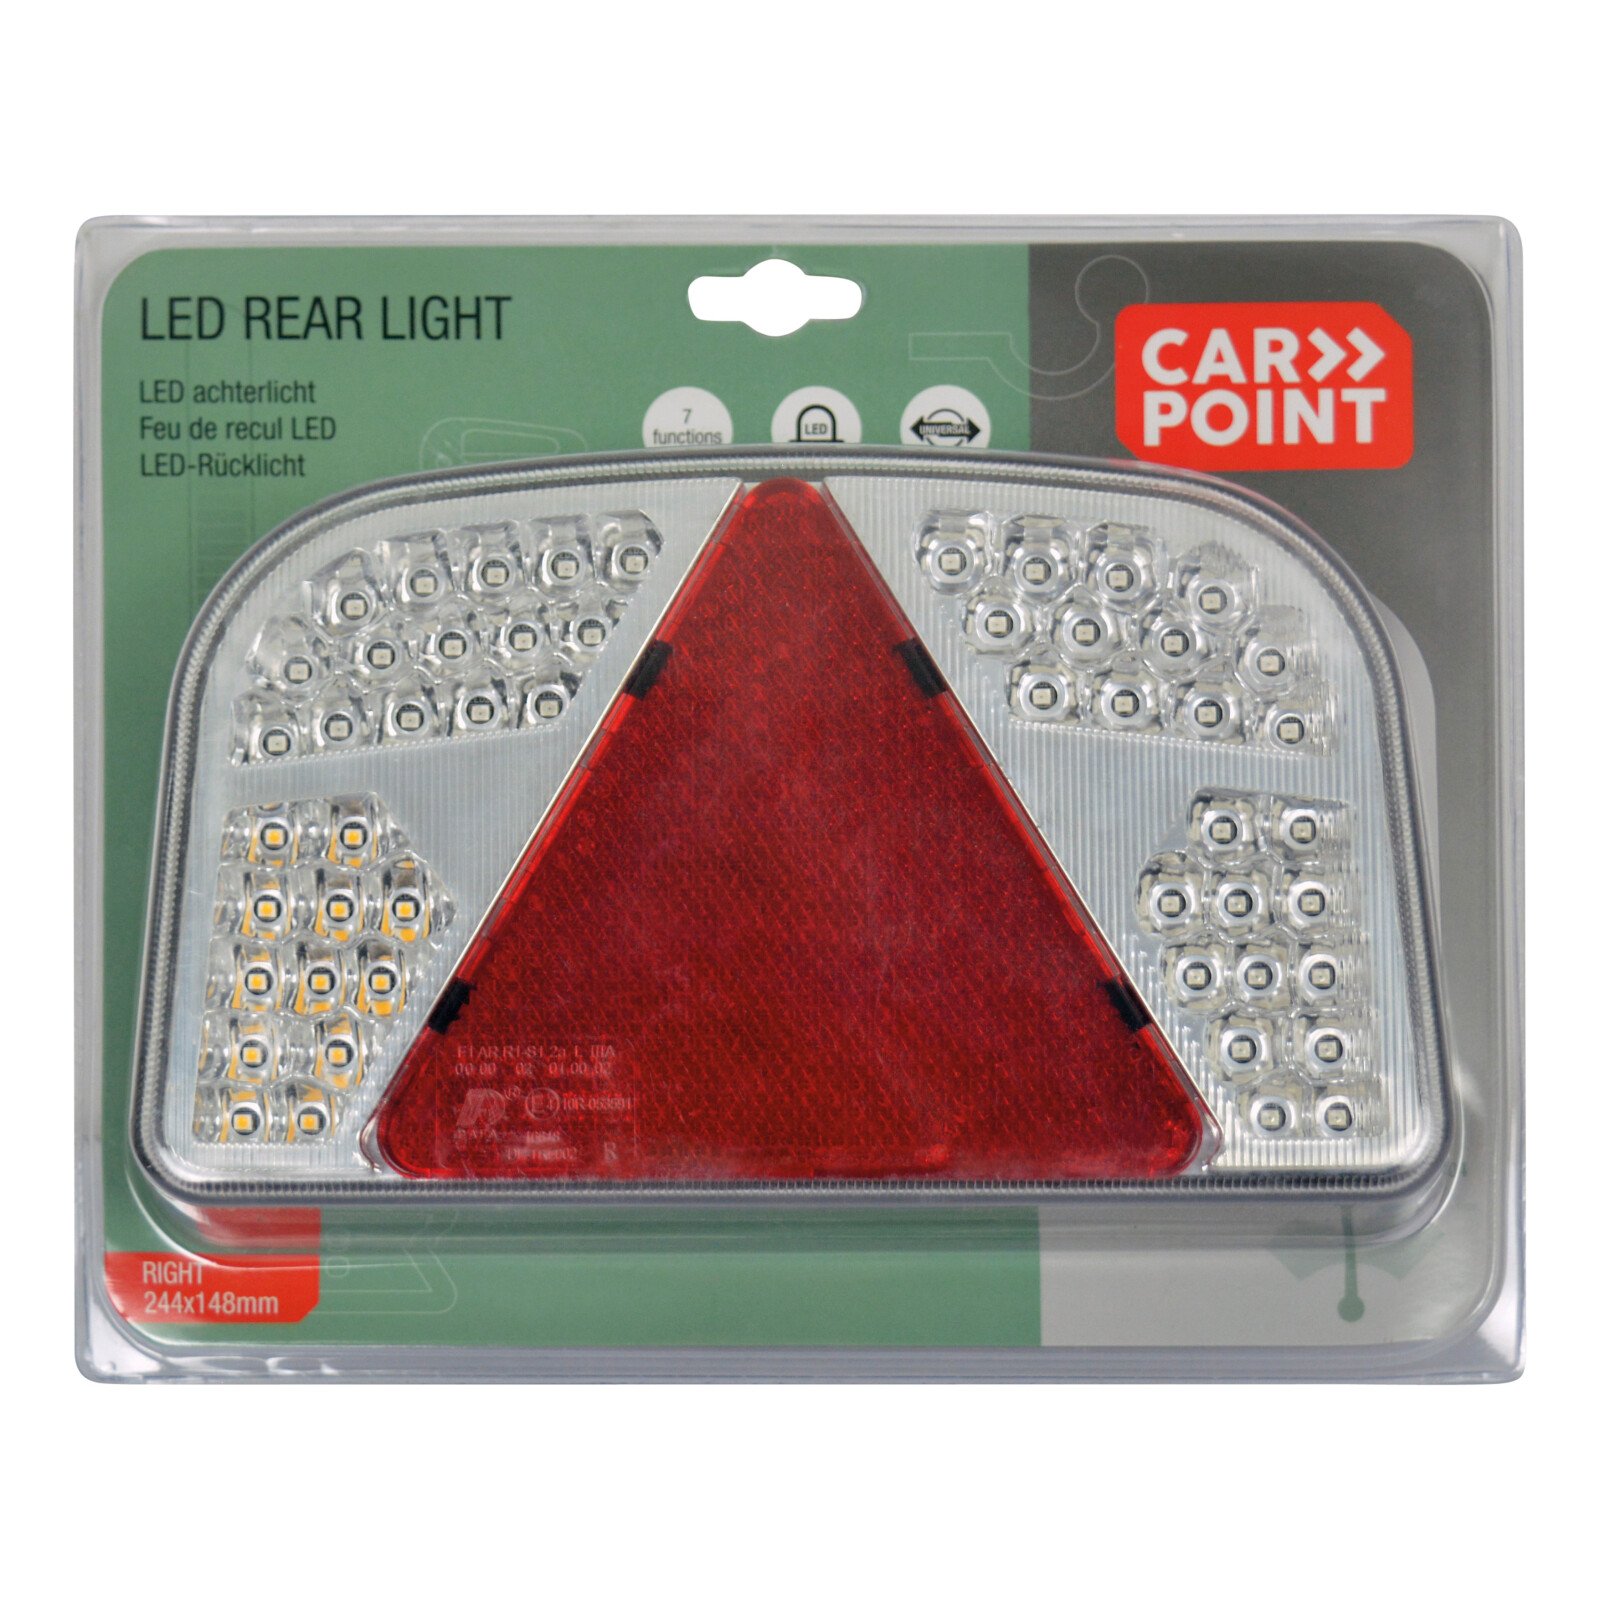 LED rear light 7funtions 244x148mm Carpoint - Right thumb